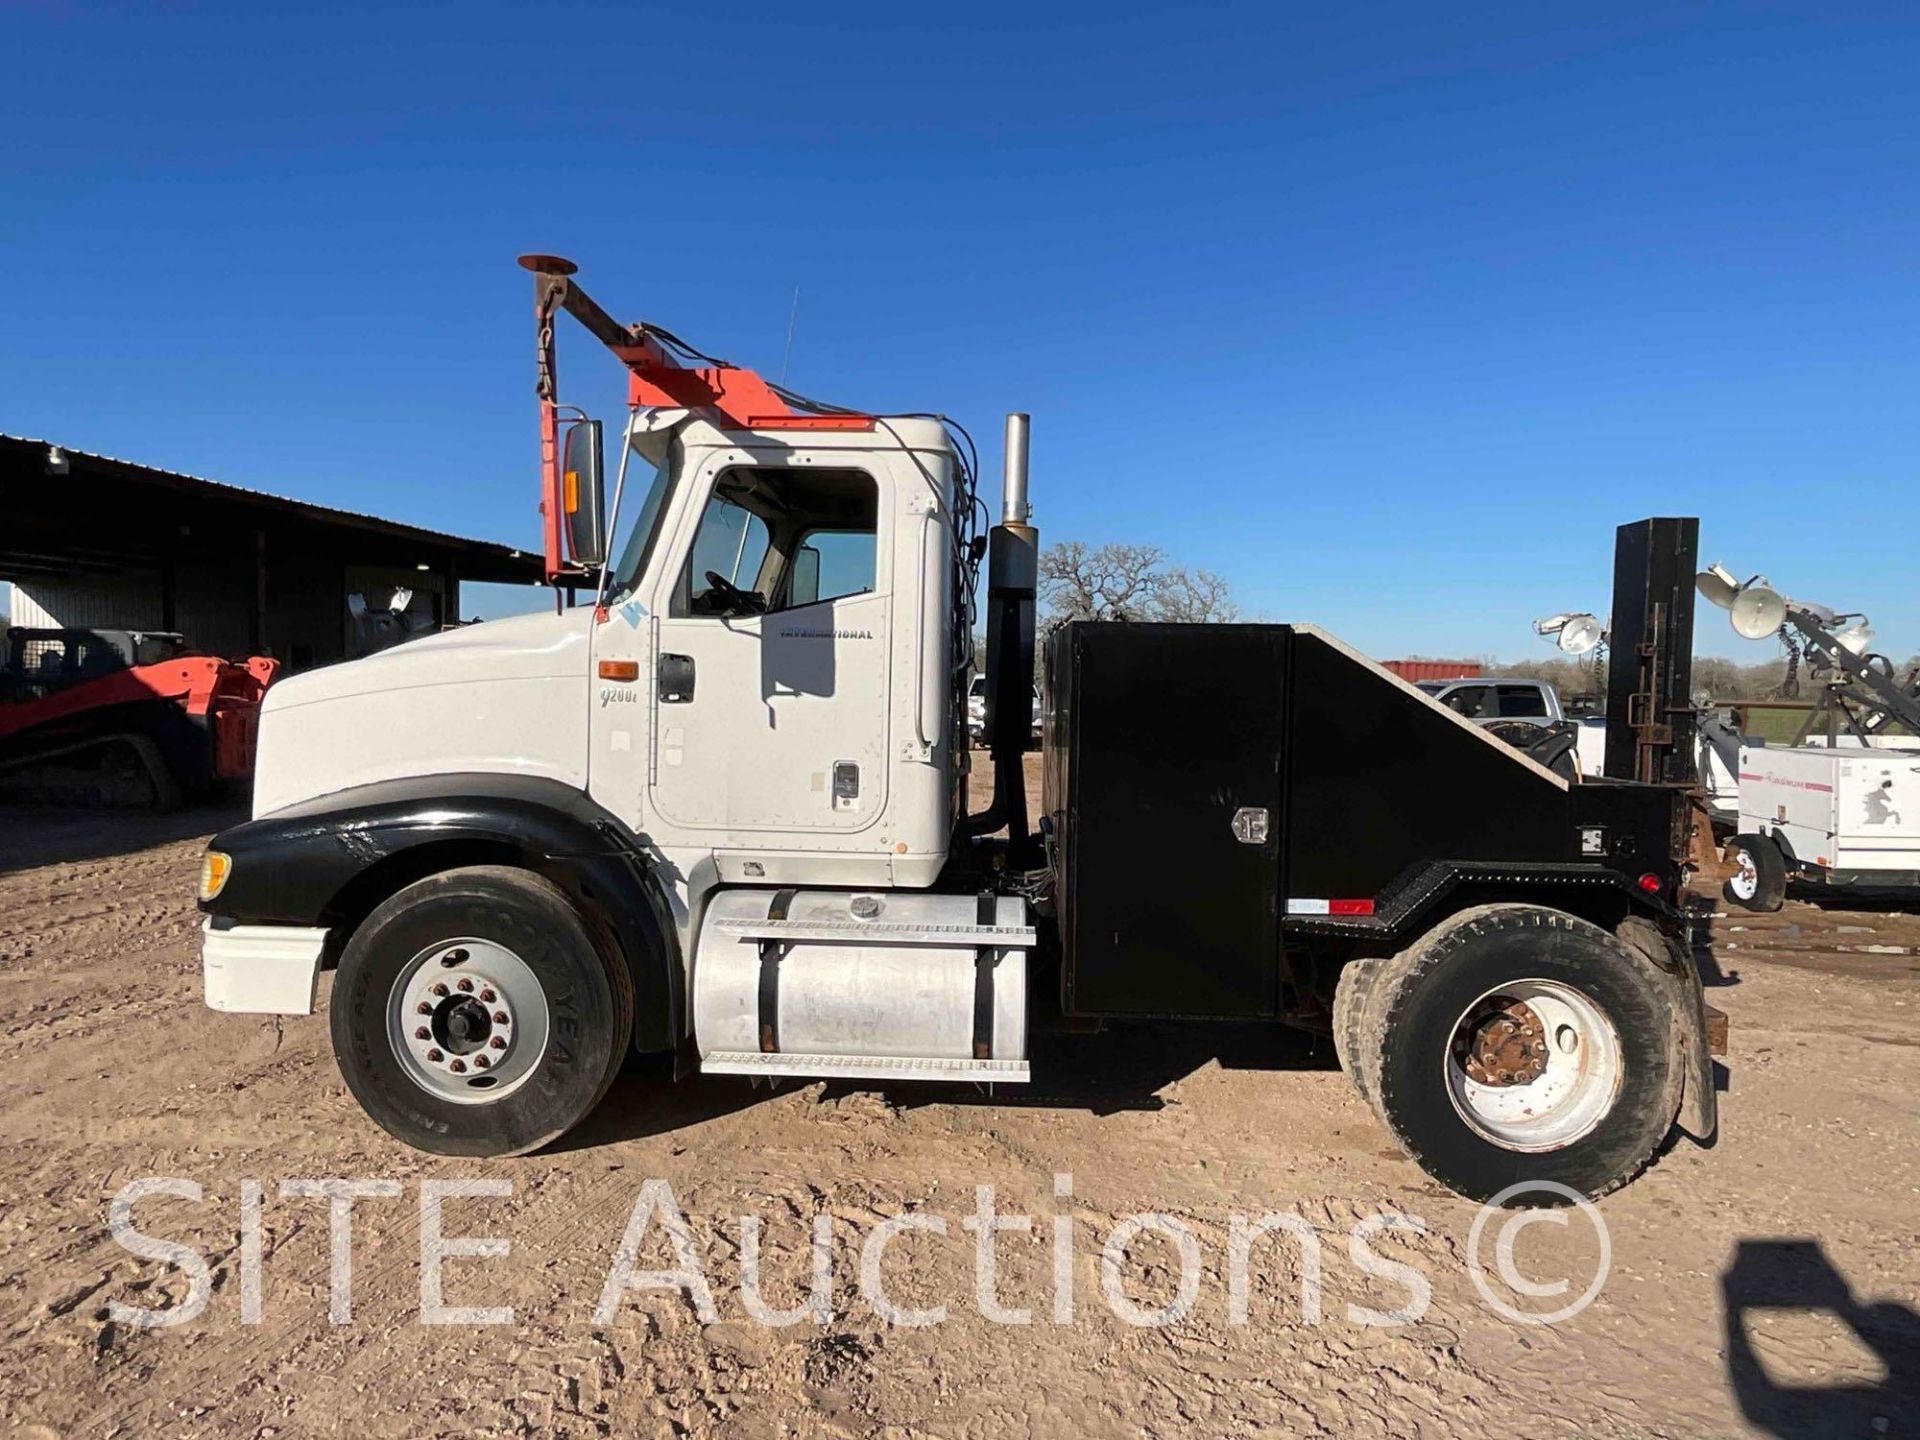 2007 International 9200i S/A Toter Truck - Image 7 of 27